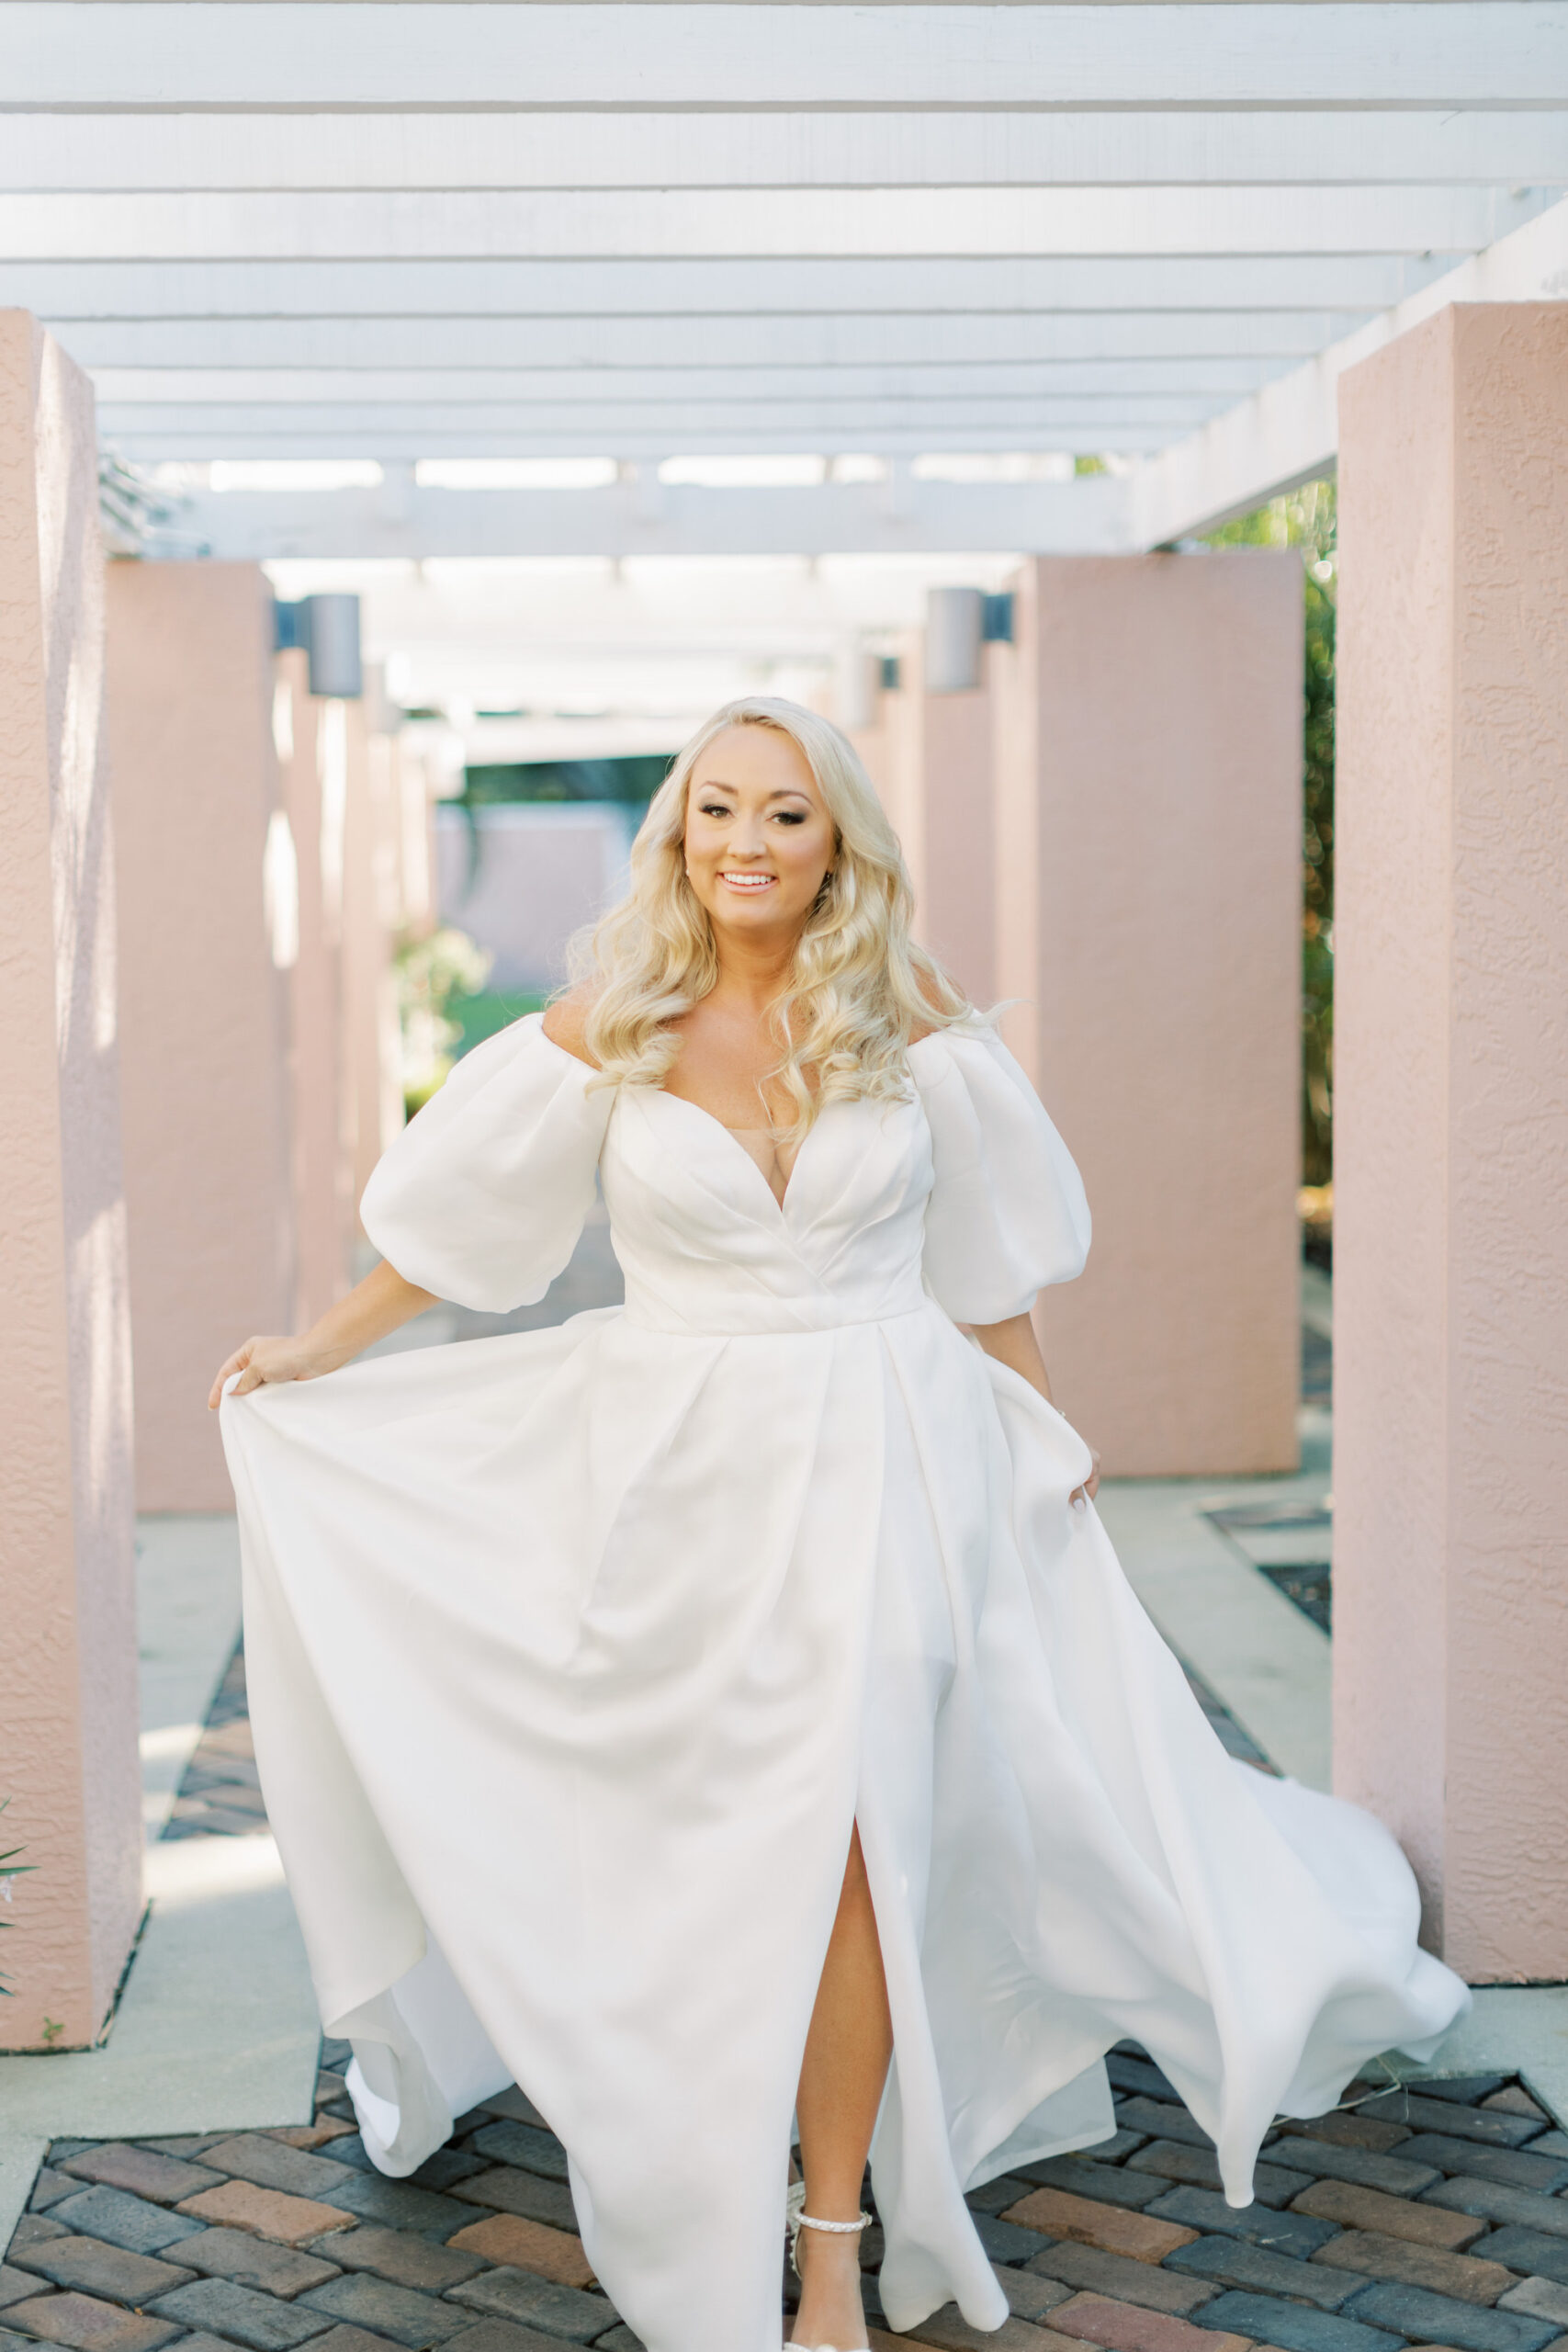 White Off-The-Shoulder Poof Sleeve A-Line Wedding Dress Ideas | Tampa Bay Planner Parties A' La Carte